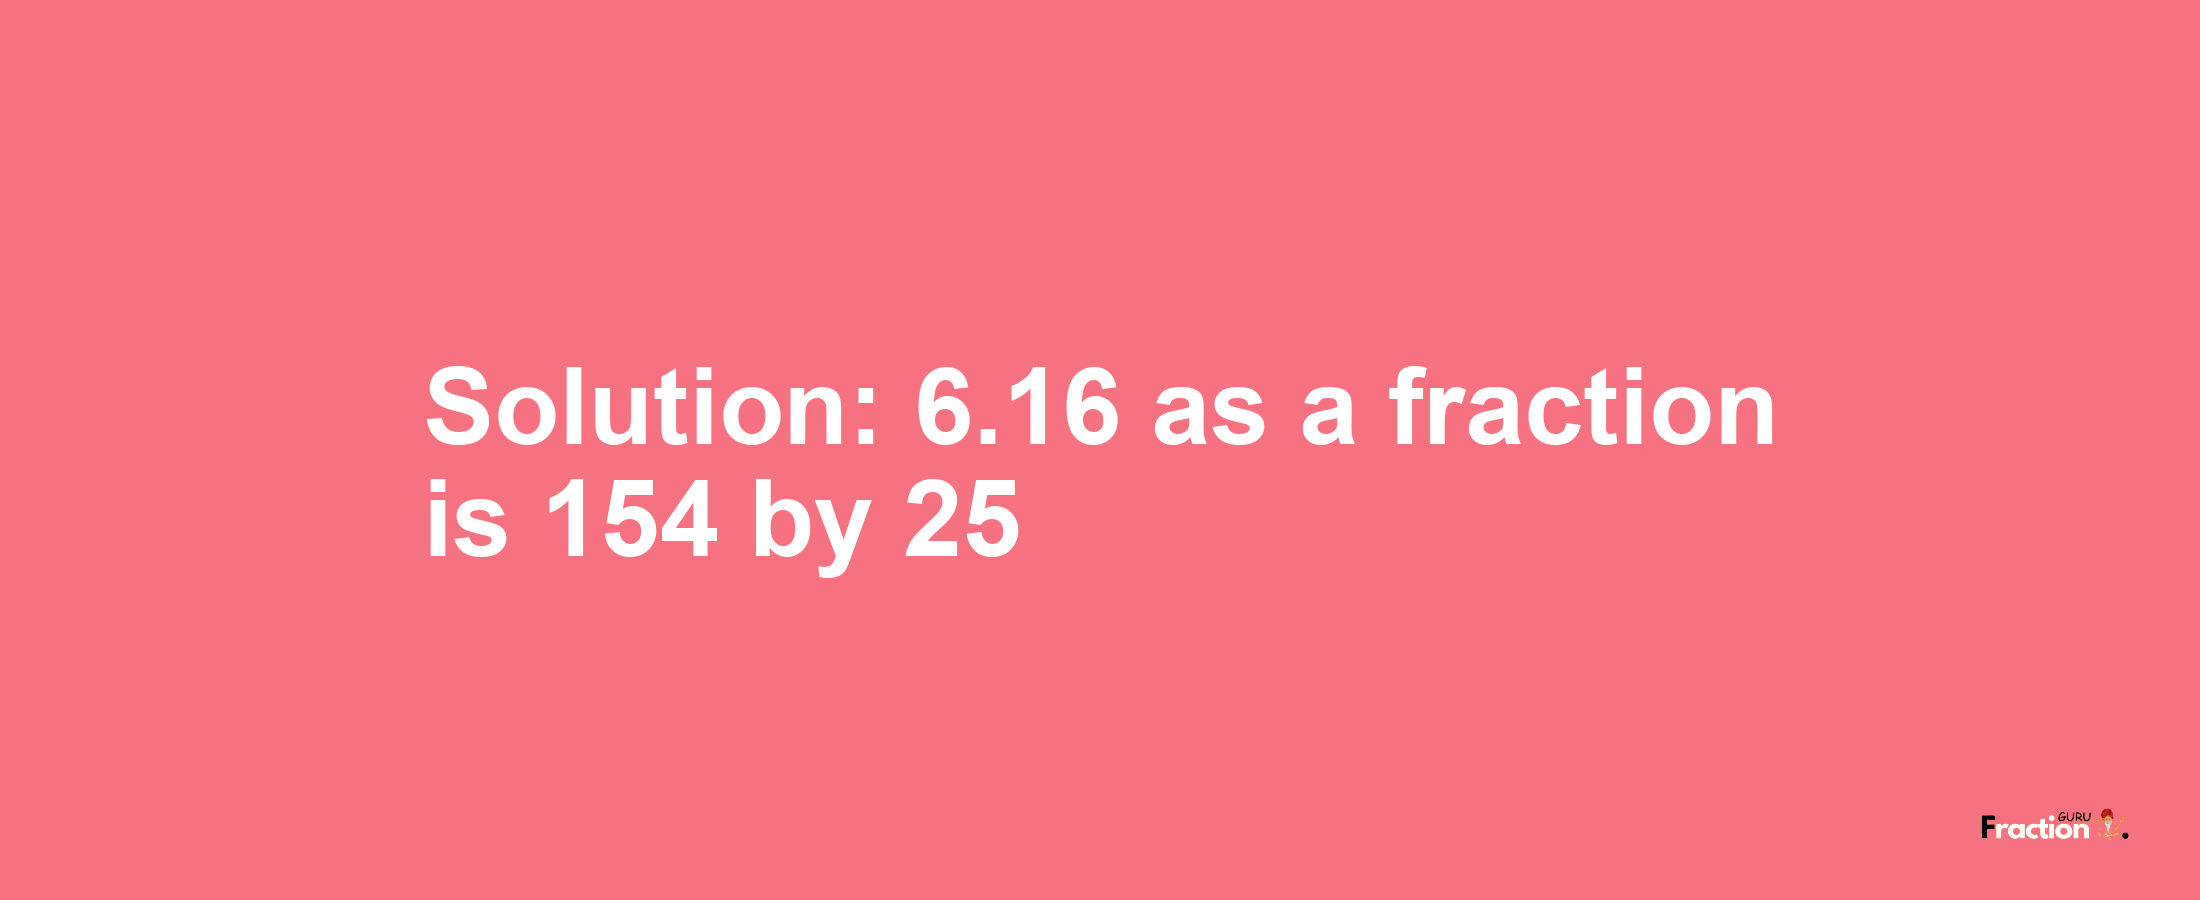 Solution:6.16 as a fraction is 154/25